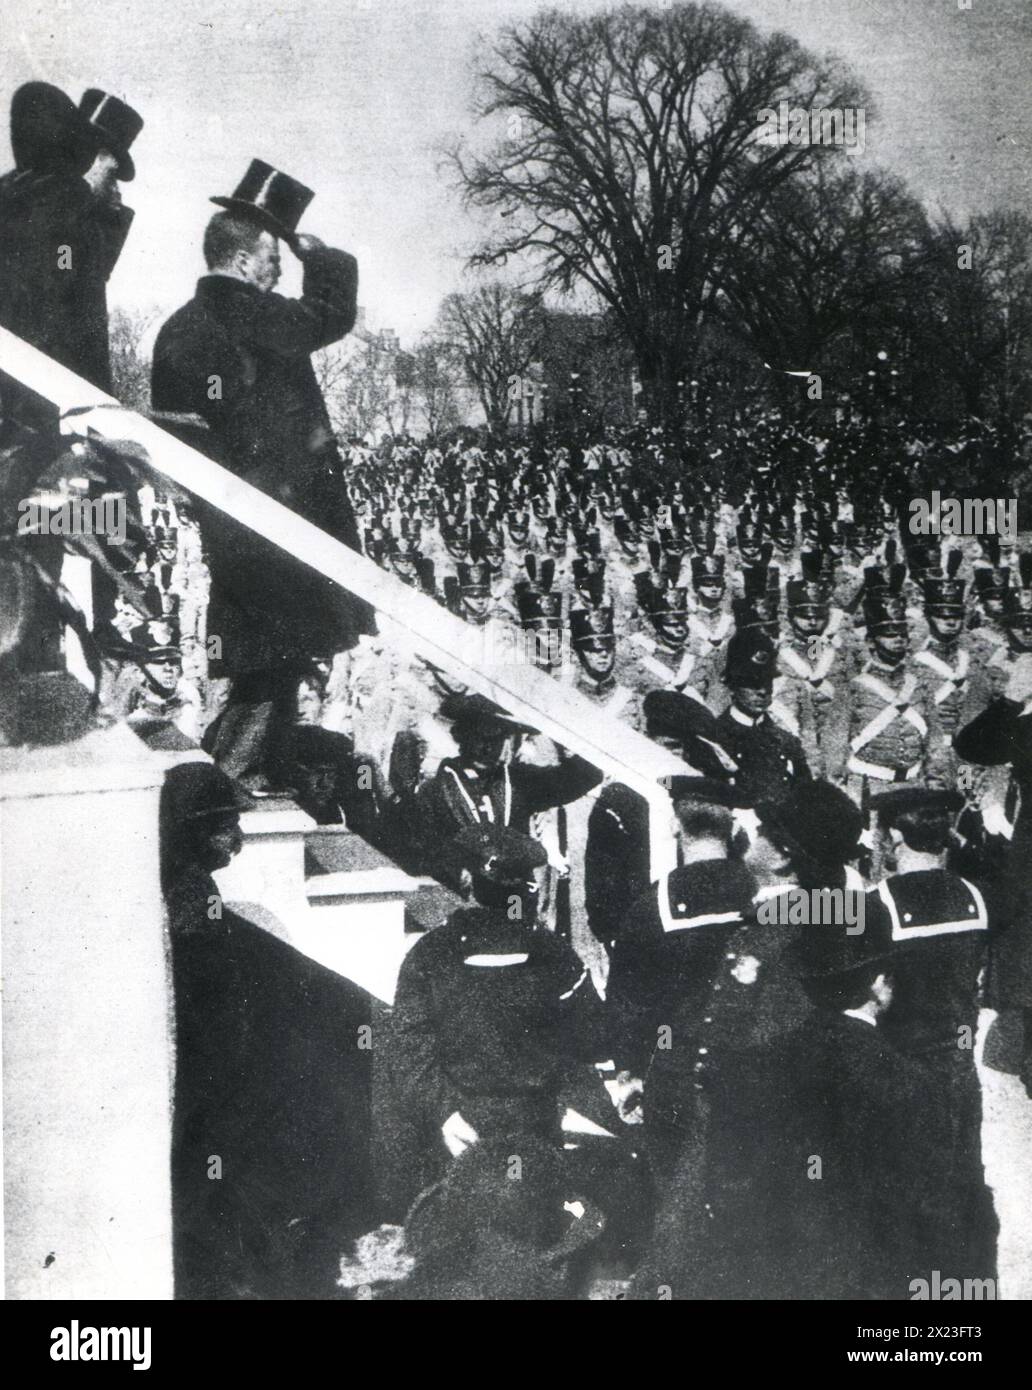 1904 - President Theodore Roosevelt shown tipping his hat to a troop of West Point cadets passing the reviewing stand during Roosevelt's Inaugural Parade. Stock Photo